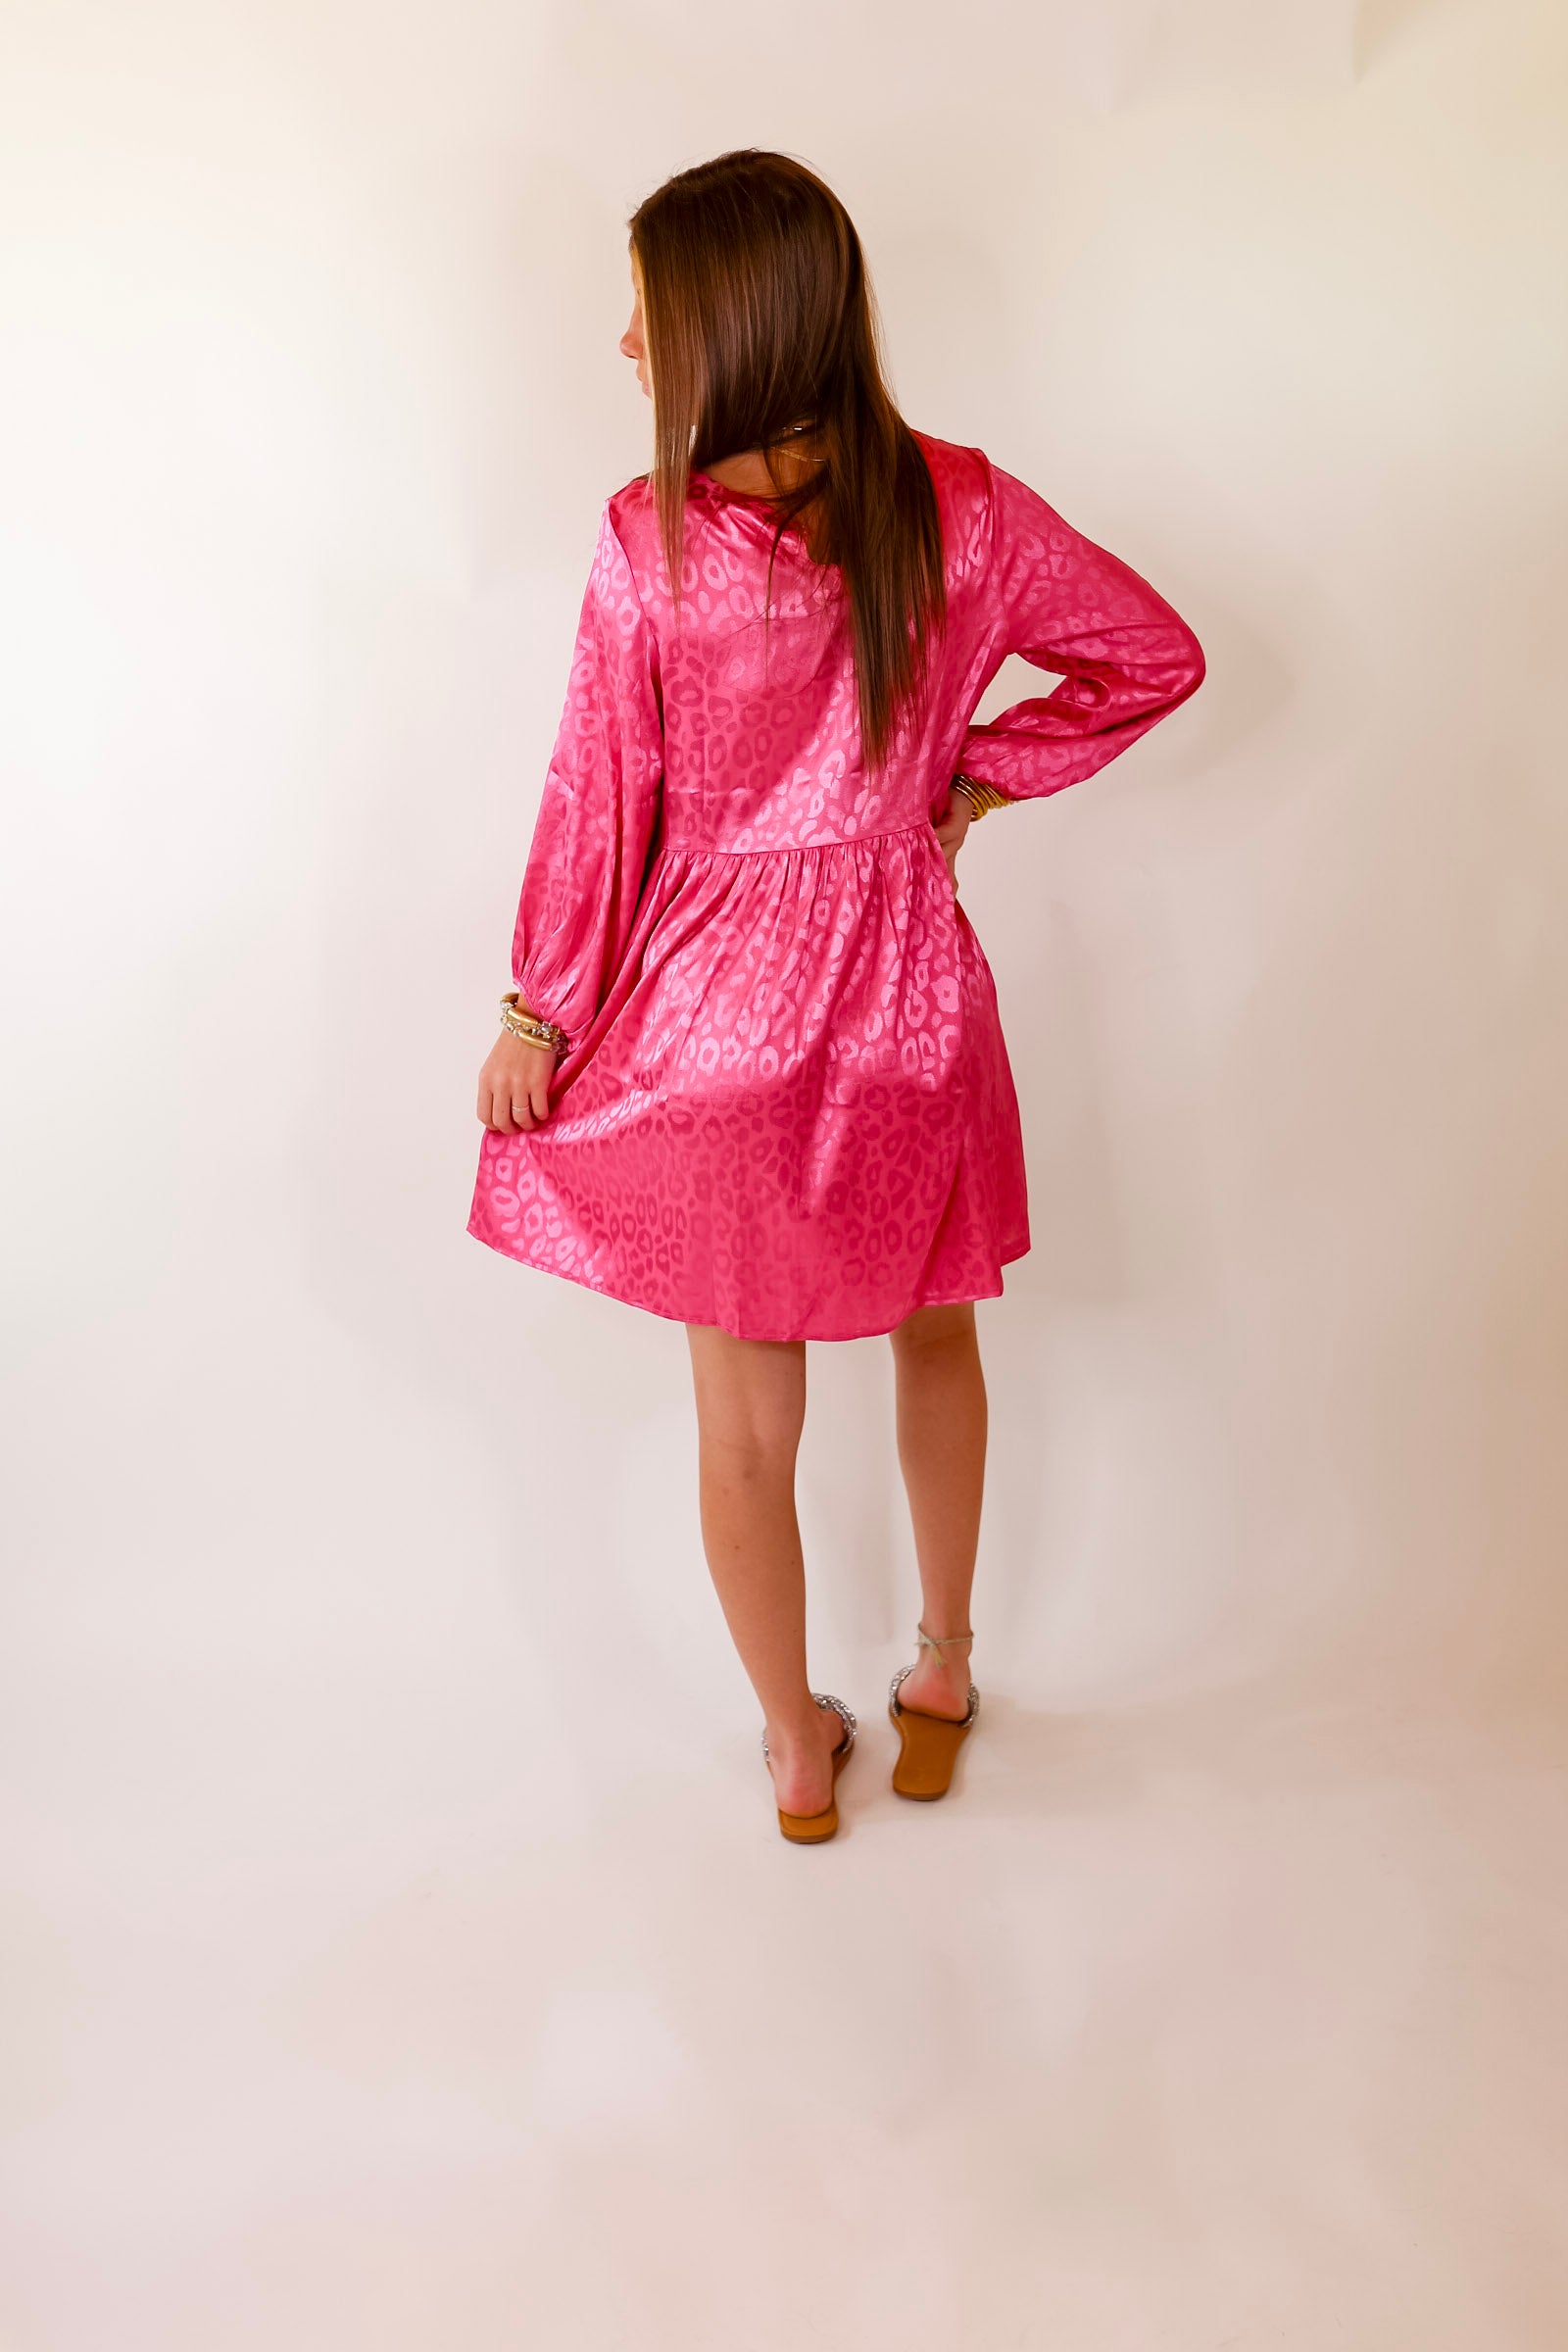 Change Is Coming Leopard Print Babydoll Dress with Long Sleeves in Hot Pink - Giddy Up Glamour Boutique